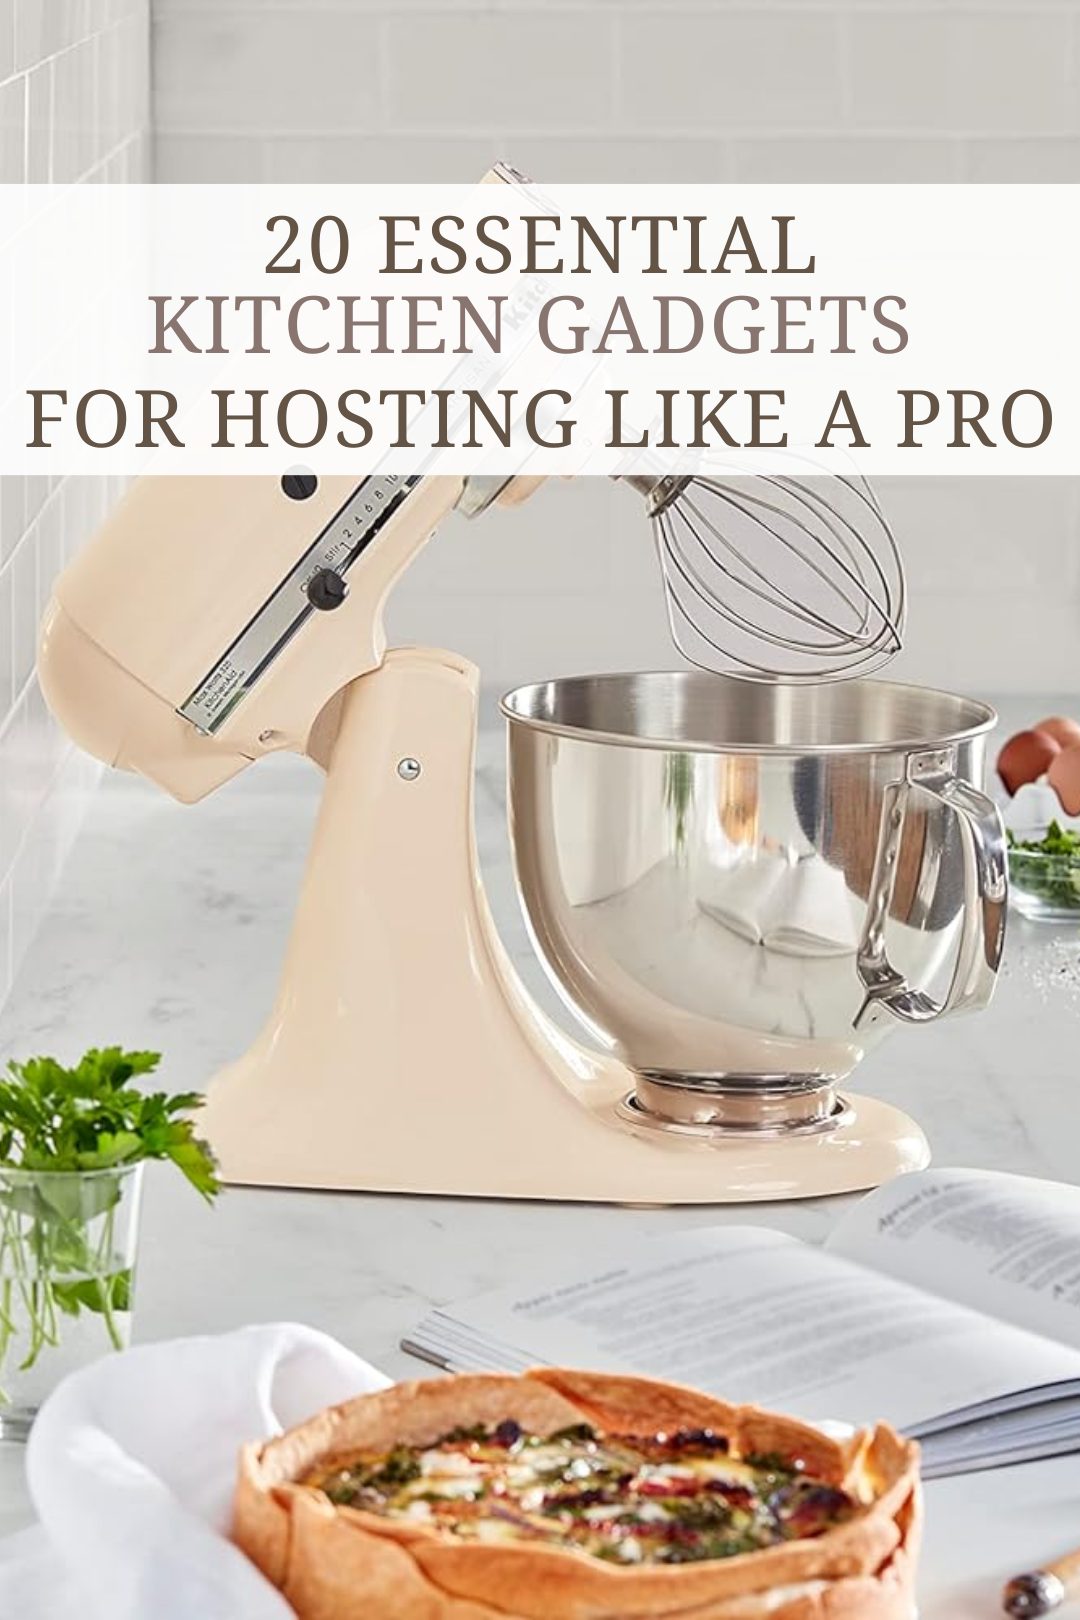 20 Essential Kitchen Gadgets for Hosting Like a Pro This Season